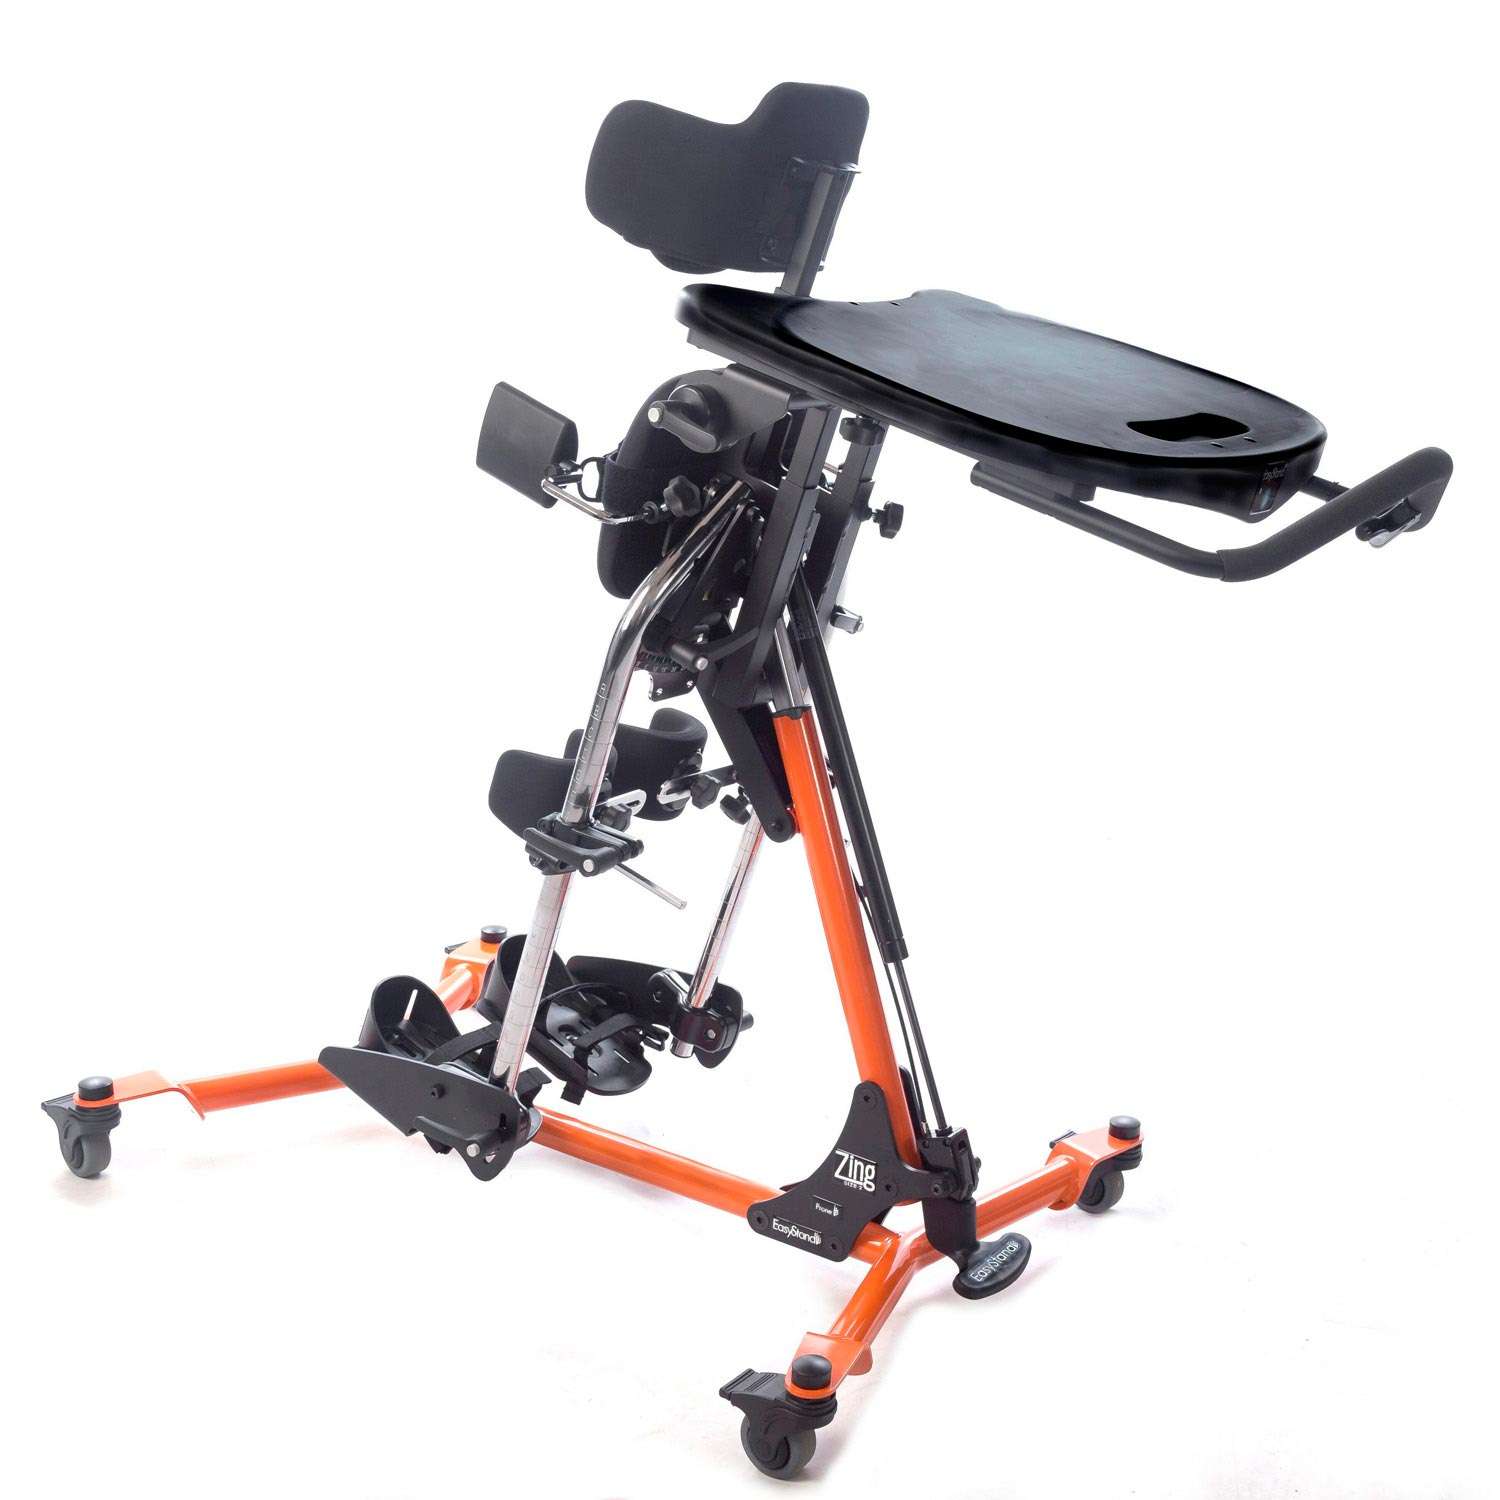 Easystand zing size 2 prone stander